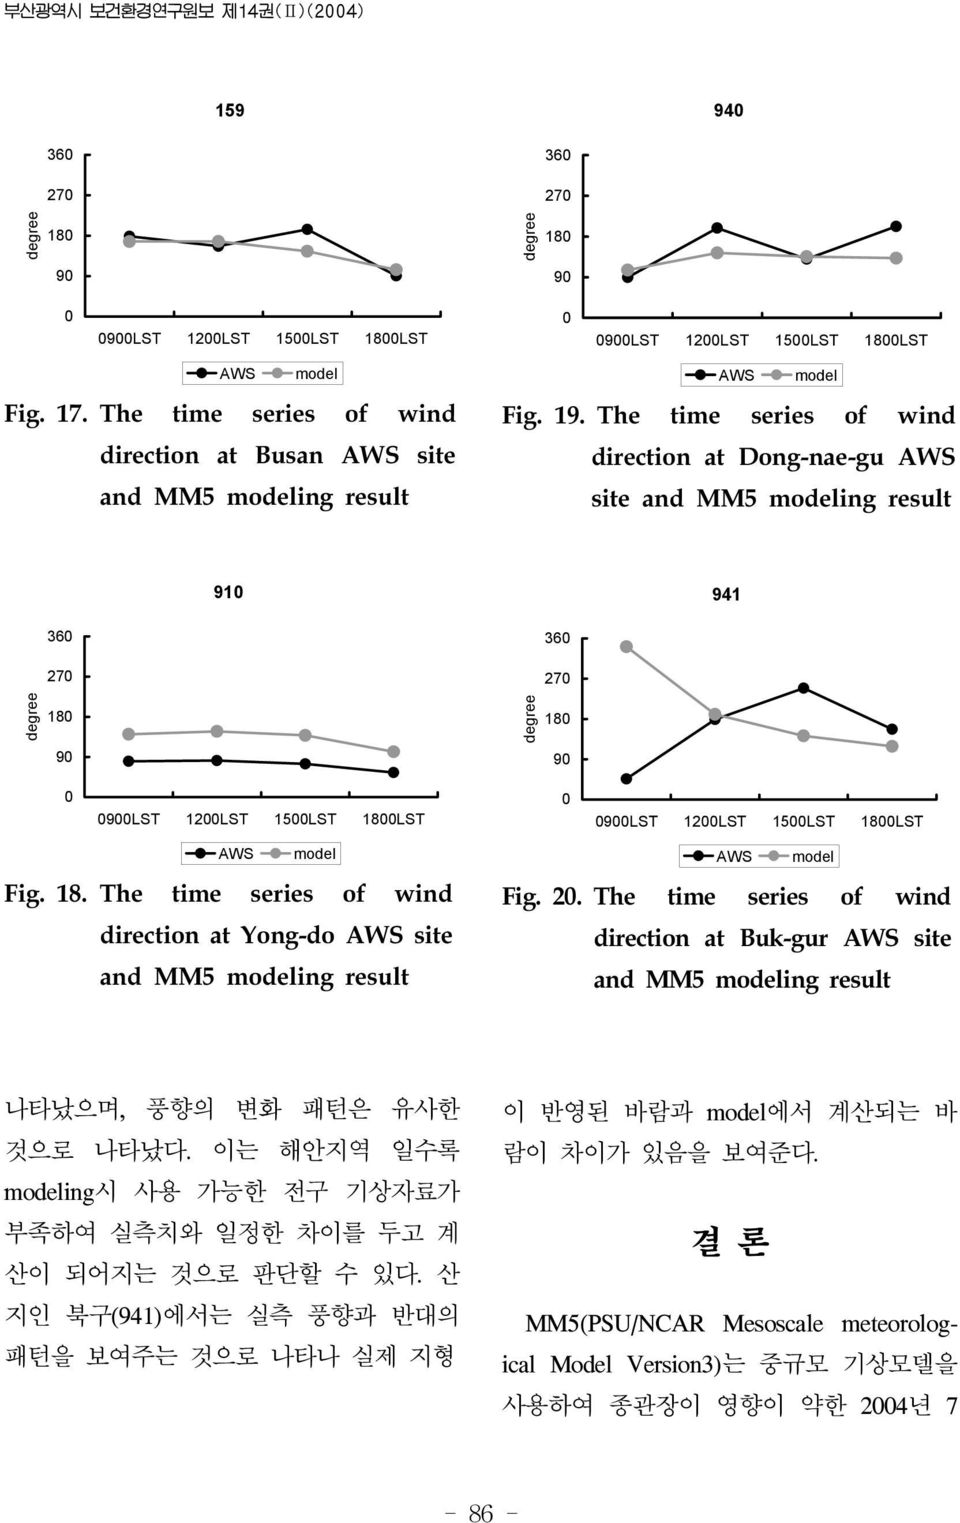 The time series of wind direction at Dong-nae-gu AWS site and MM5 modeling result 360 270 910 360 270 941 degree 180 degree 180 90 90 0 0900LST 1200LST 1500LST 1800LST 0 0900LST 1200LST 1500LST